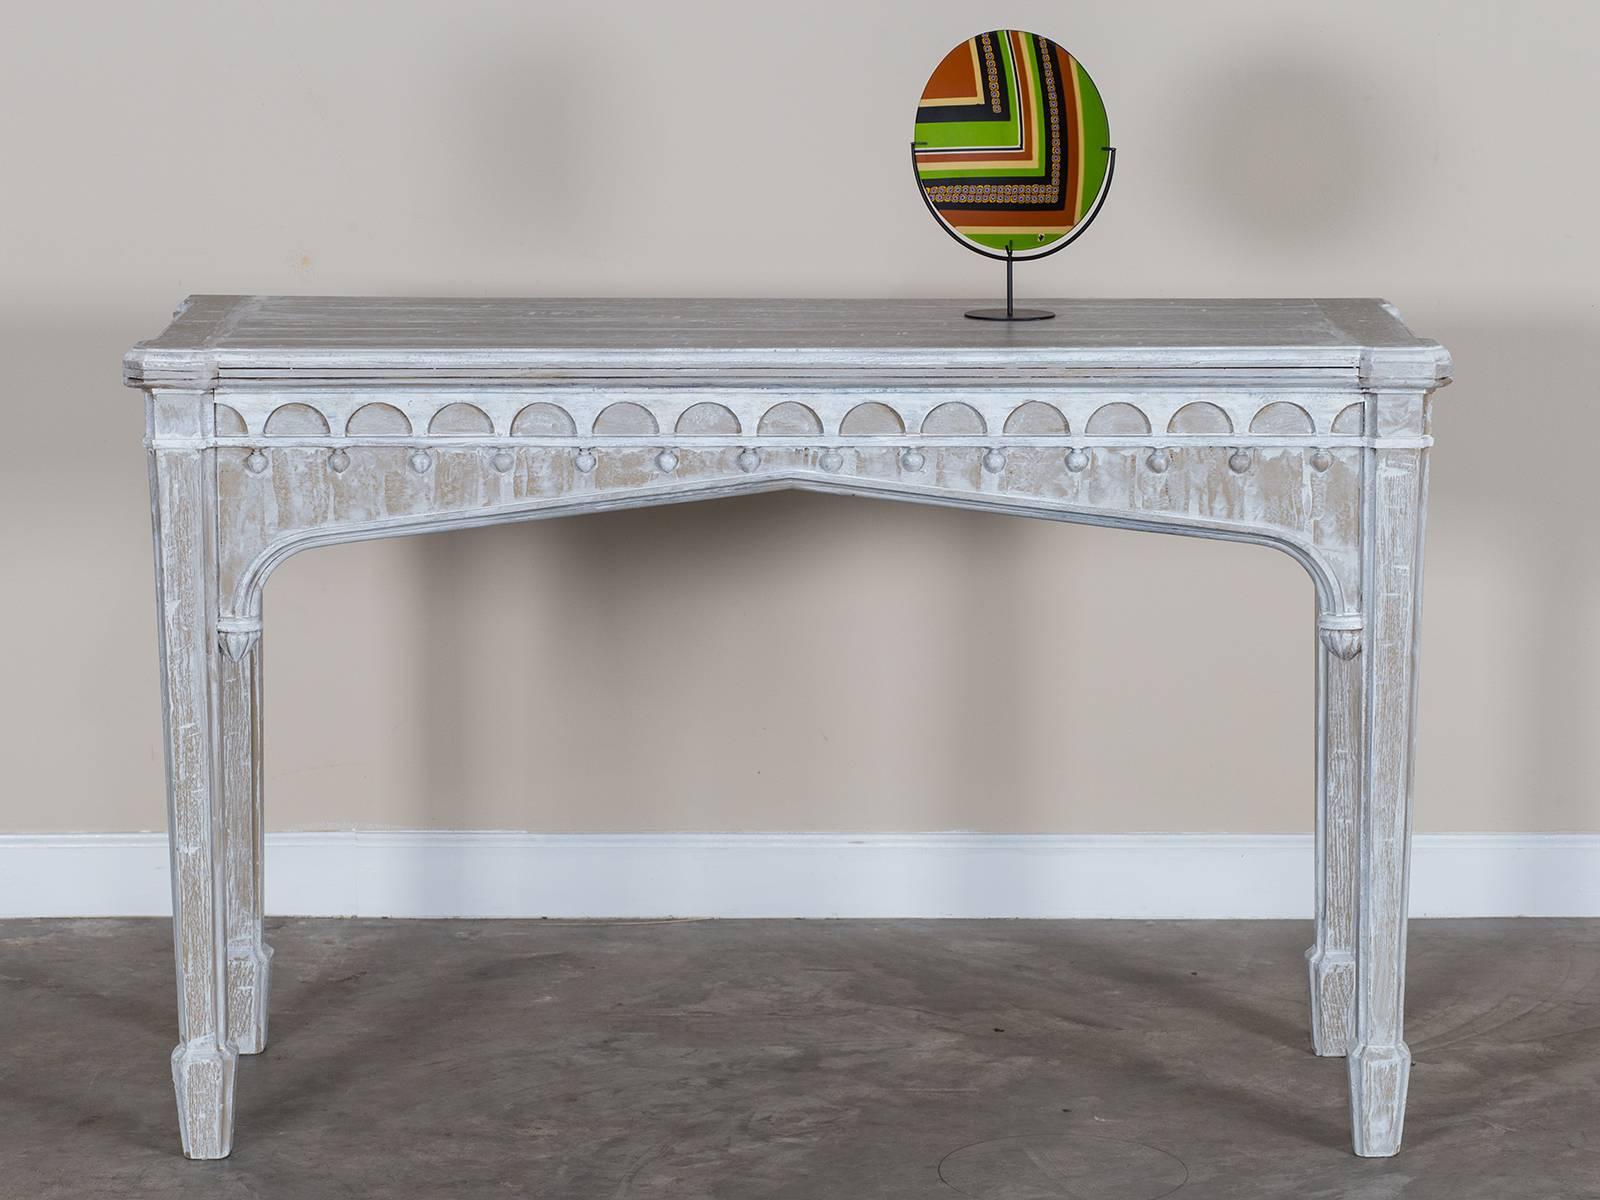 Receive our new selections direct from 1stdibs by email each week. Please click Follow Dealer below and see them first!

The bold lines of this antique English console or serving table circa 1840 have a graphic detail that is quite sculptural. The